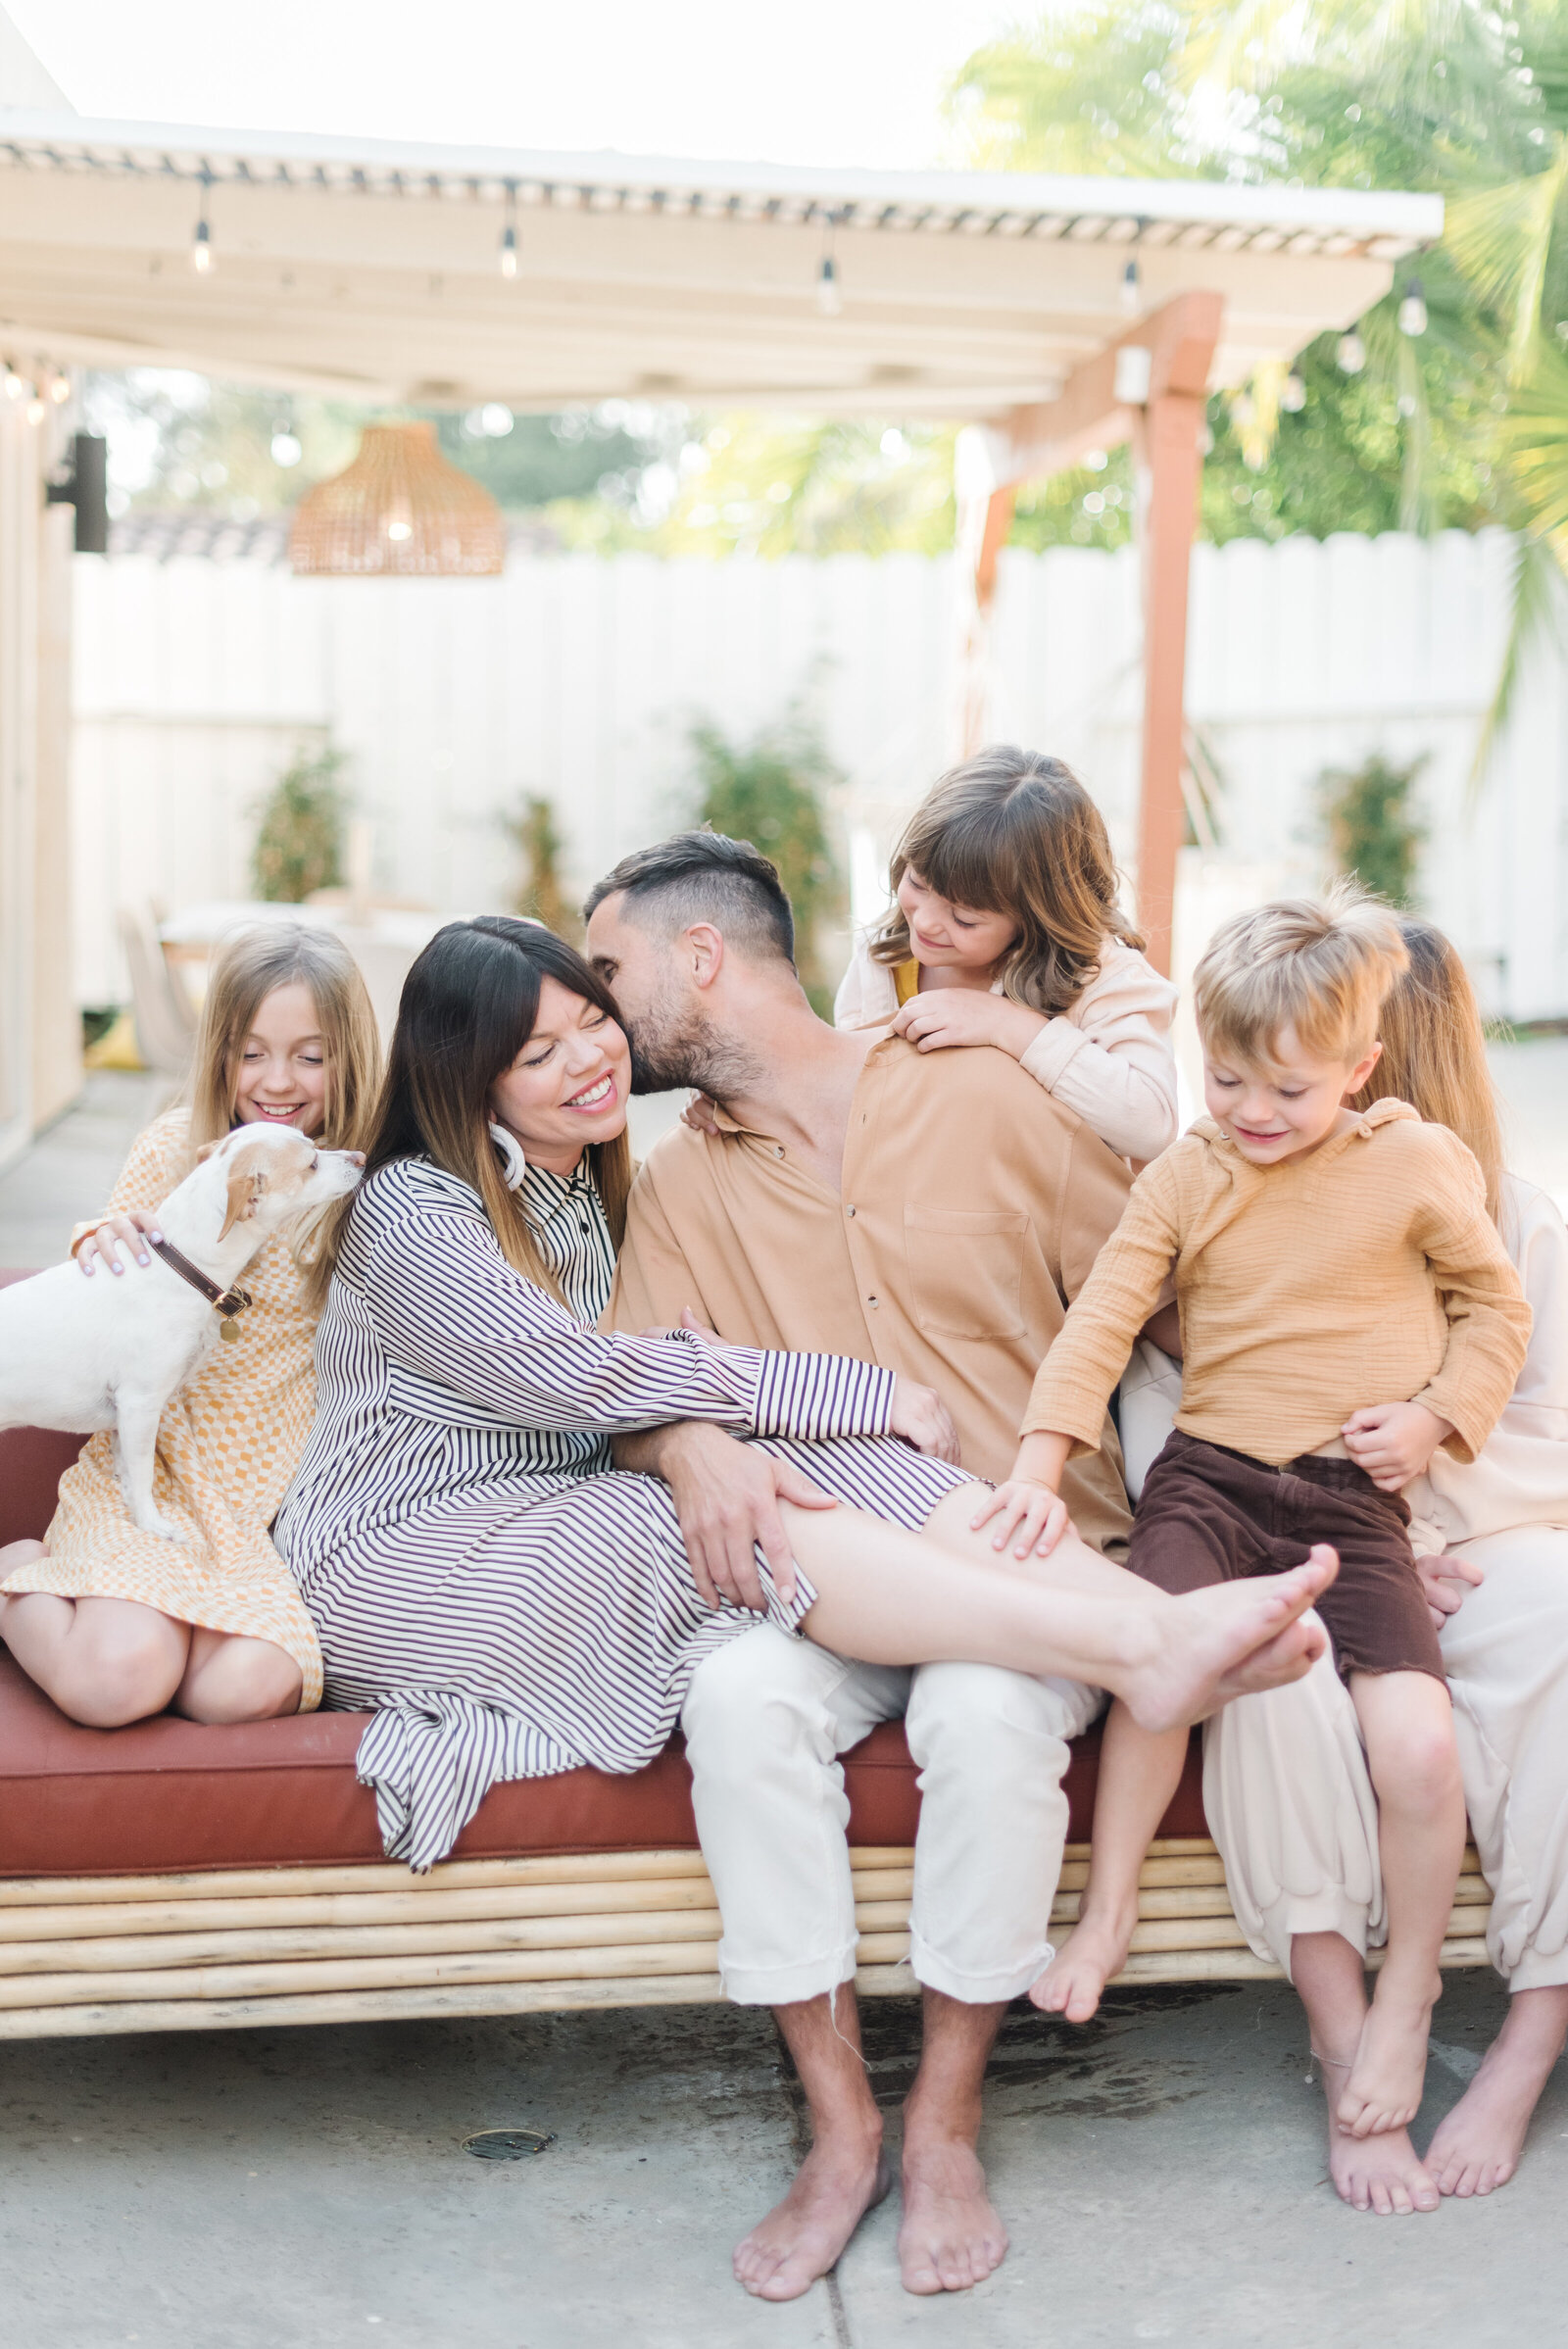 Dad kissing mom on cheek surrounded by four kids and a dog - Virginia Family Photographer